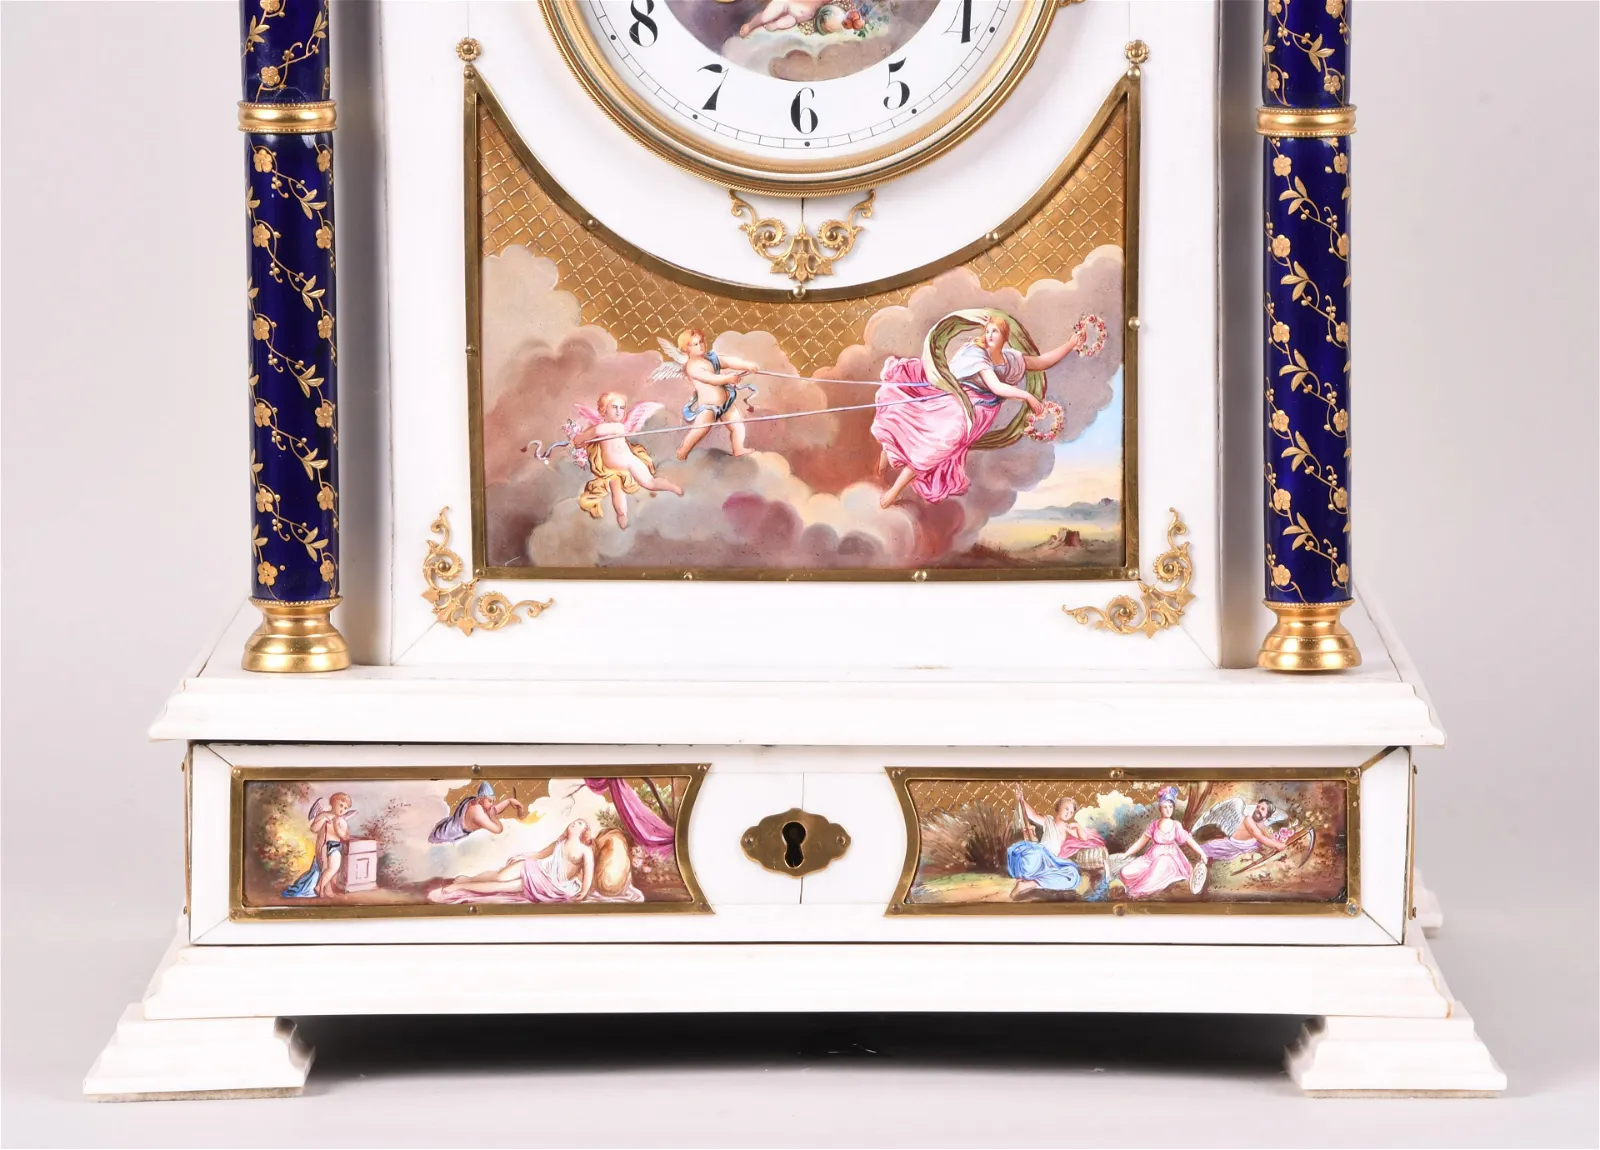 An unusual large late 19th century Austro Hungarian ivory and enamel table clock